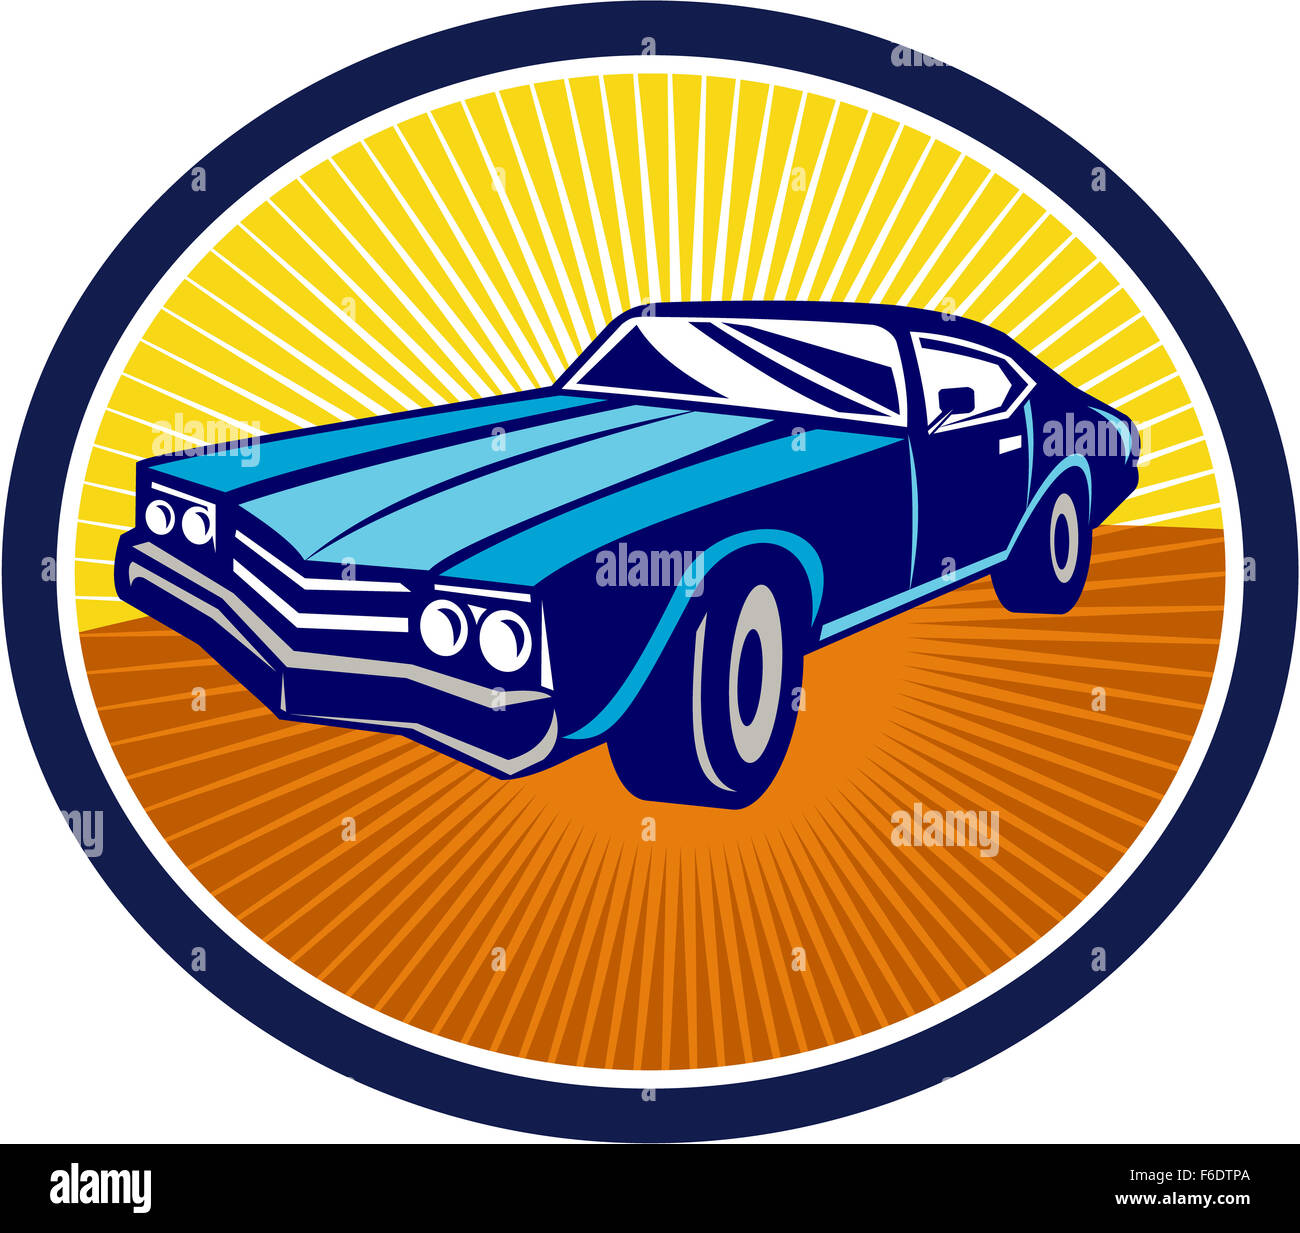 Illustration of an american vintage muscle car set inside oval viewed from front on isolated background done in retro style. Stock Photo